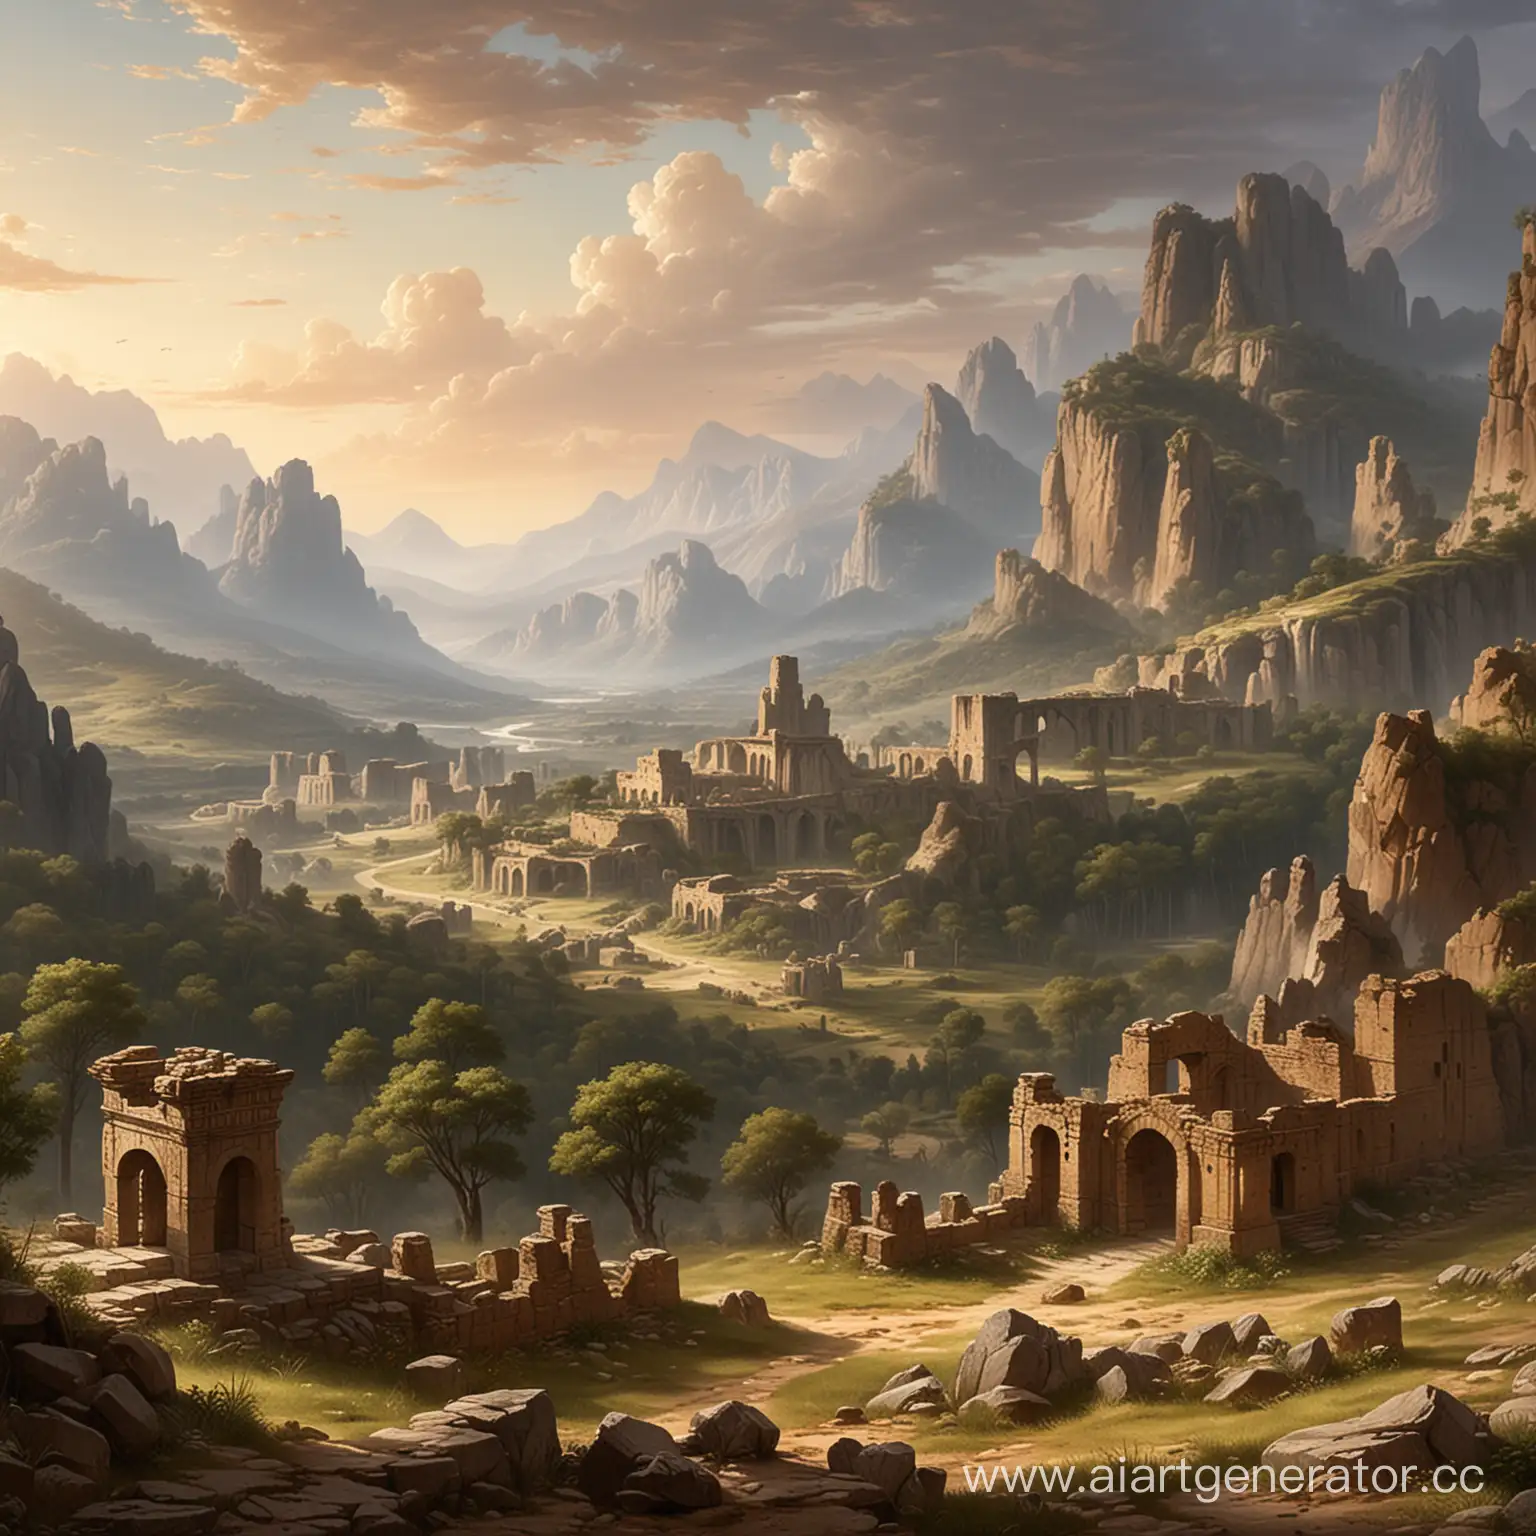 Majestic-Mountain-Landscape-with-Ancient-Ruins